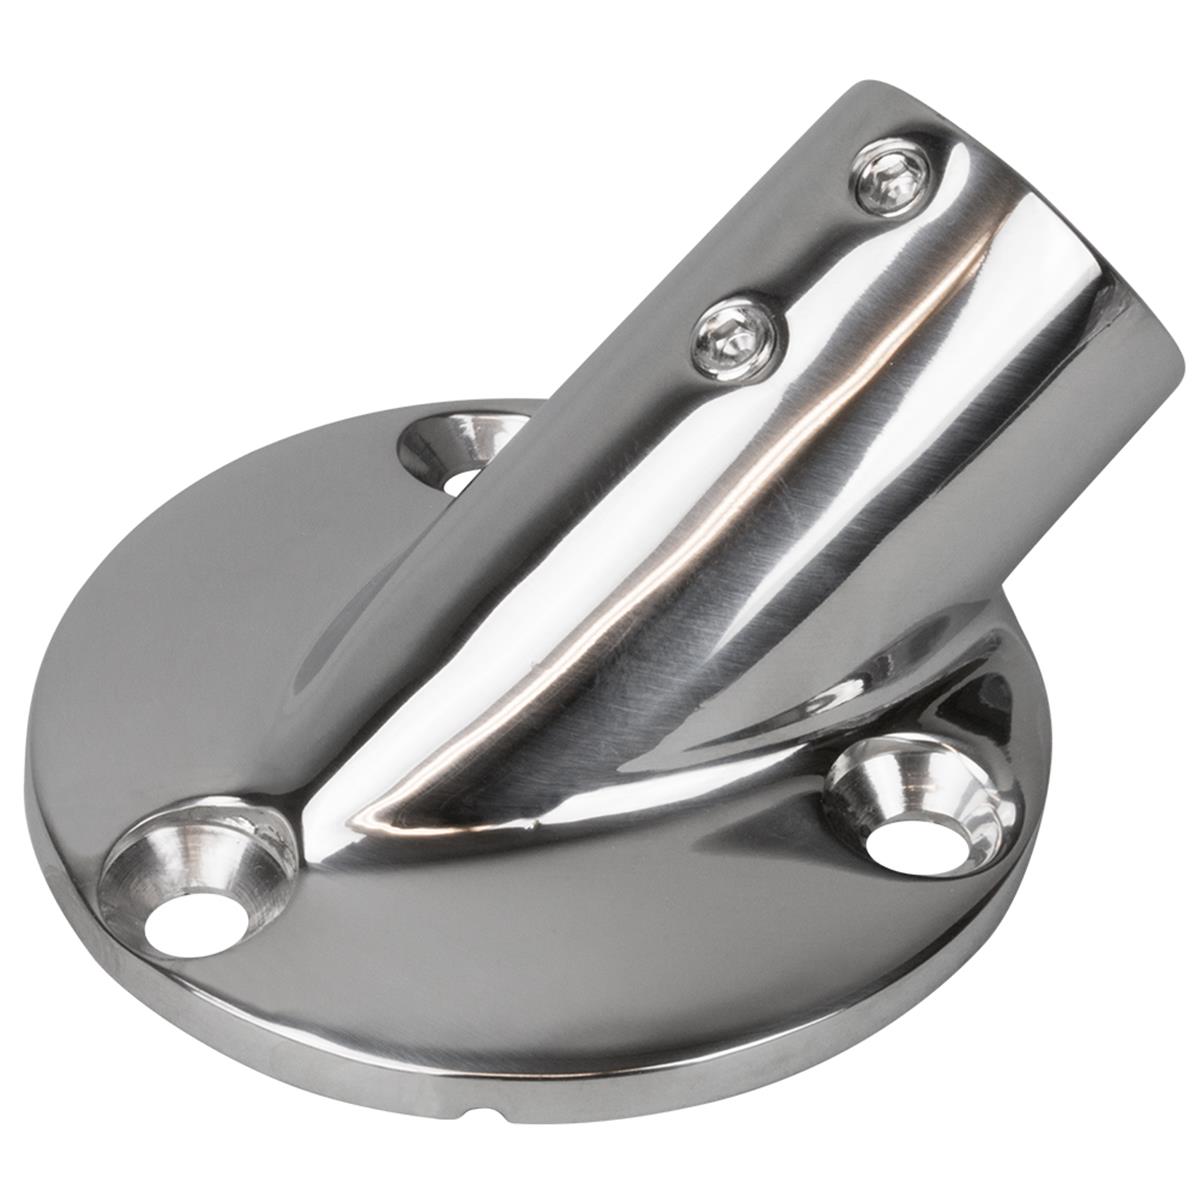 SEA DOG Sea-Dog 280301-1 2.75 in. Rail Fitting Round Base with 30 deg 316 Stainless Steel - 1 in. Outdoor